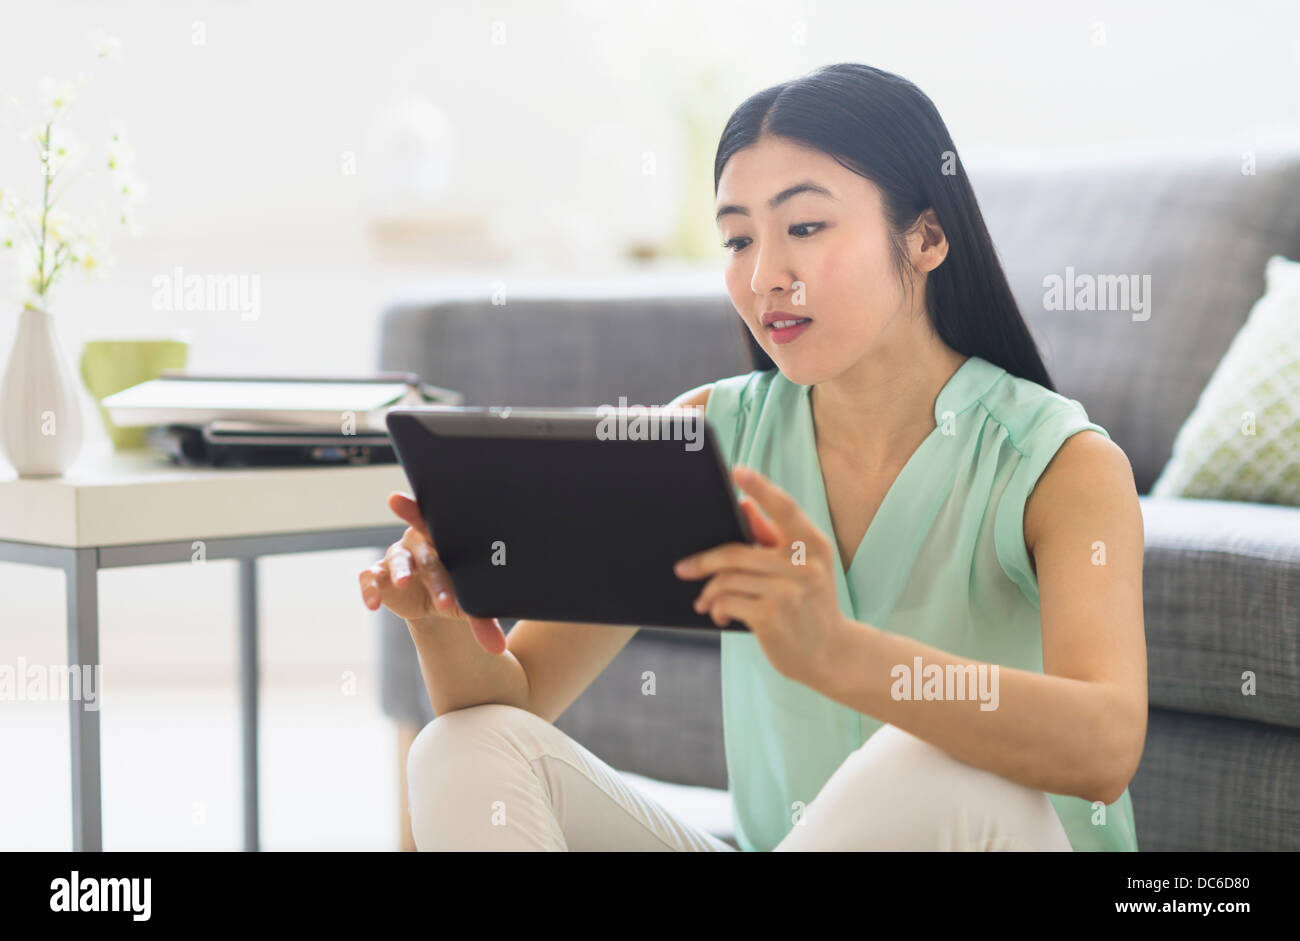 Woman using tablet pc at home Stock Photo